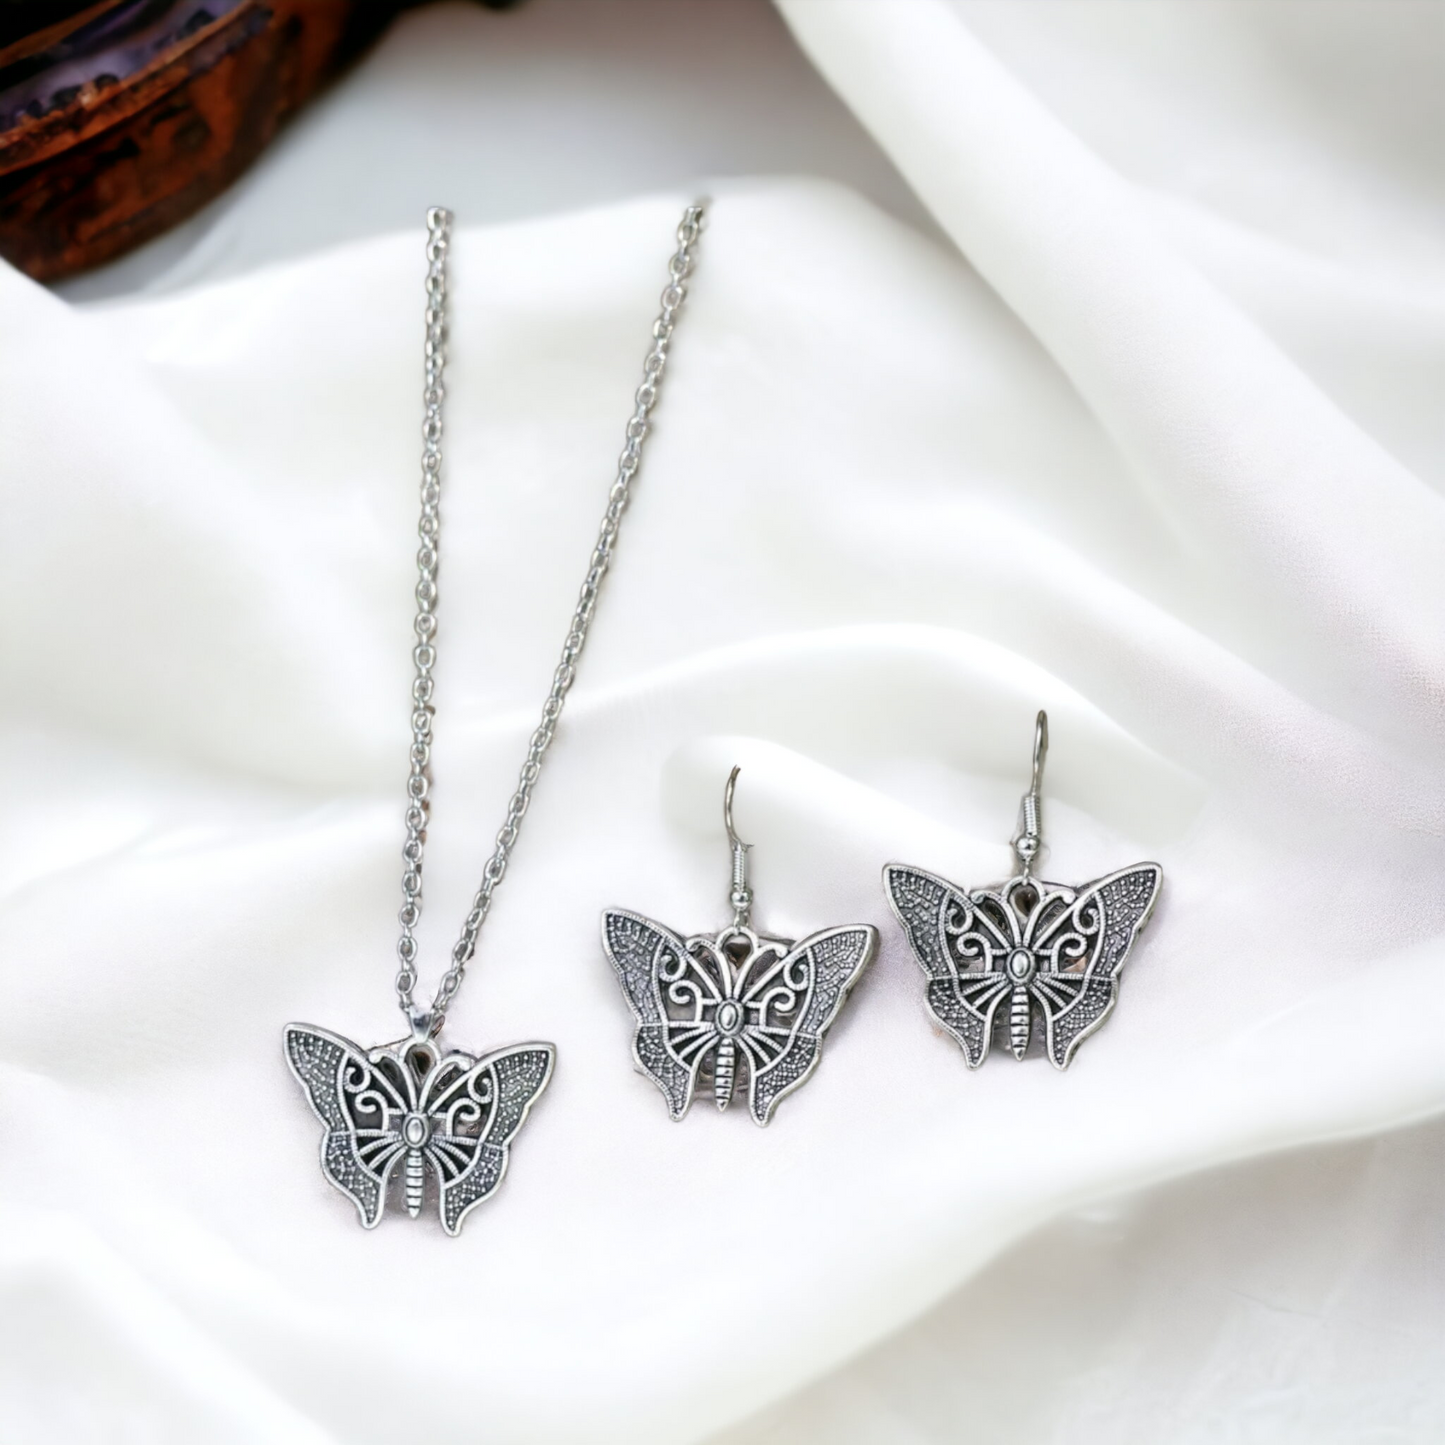 Fly with me necklace set